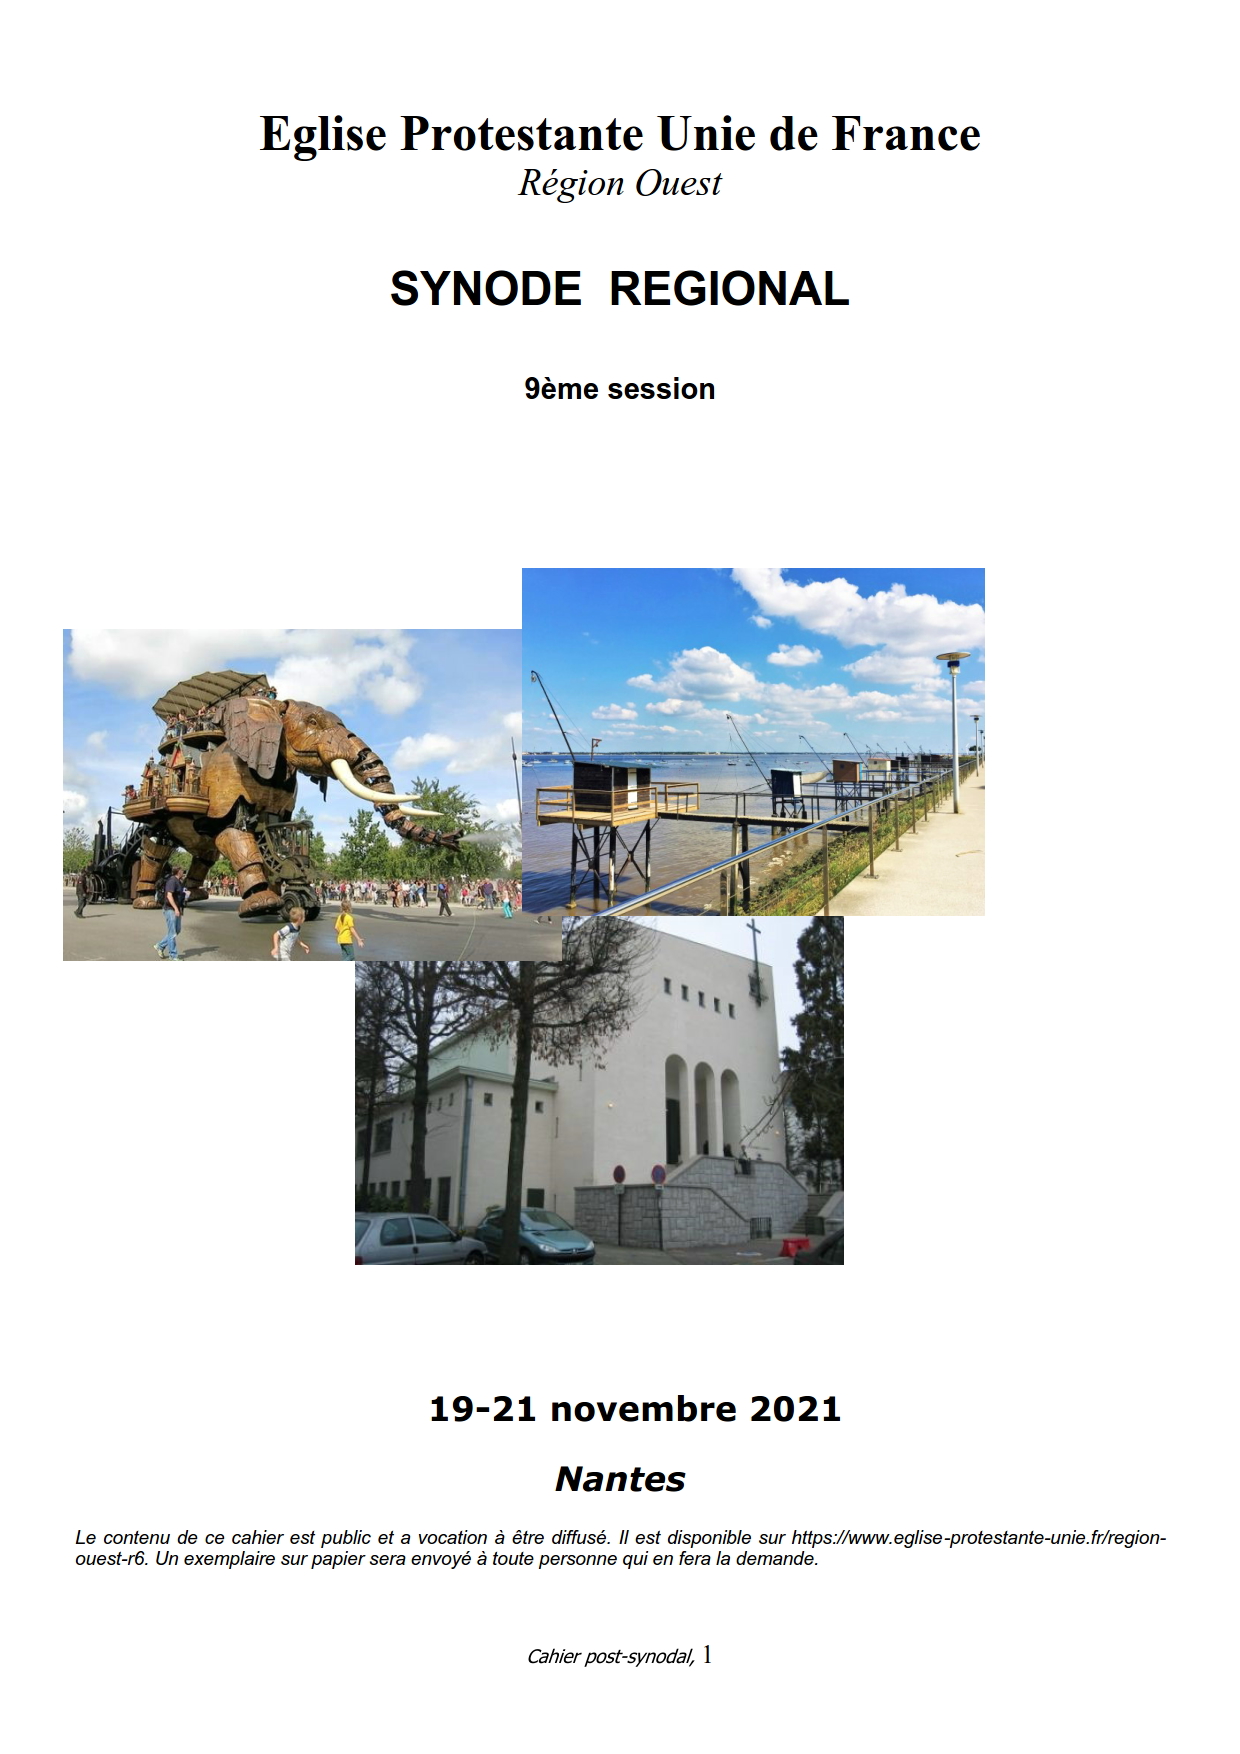 https://region-ouest.epudf.org/wp-content/uploads/sites/9/2022/06/2021-synode-de-nantes-cahier_post_synodal_Ouest_2021__1.jpg